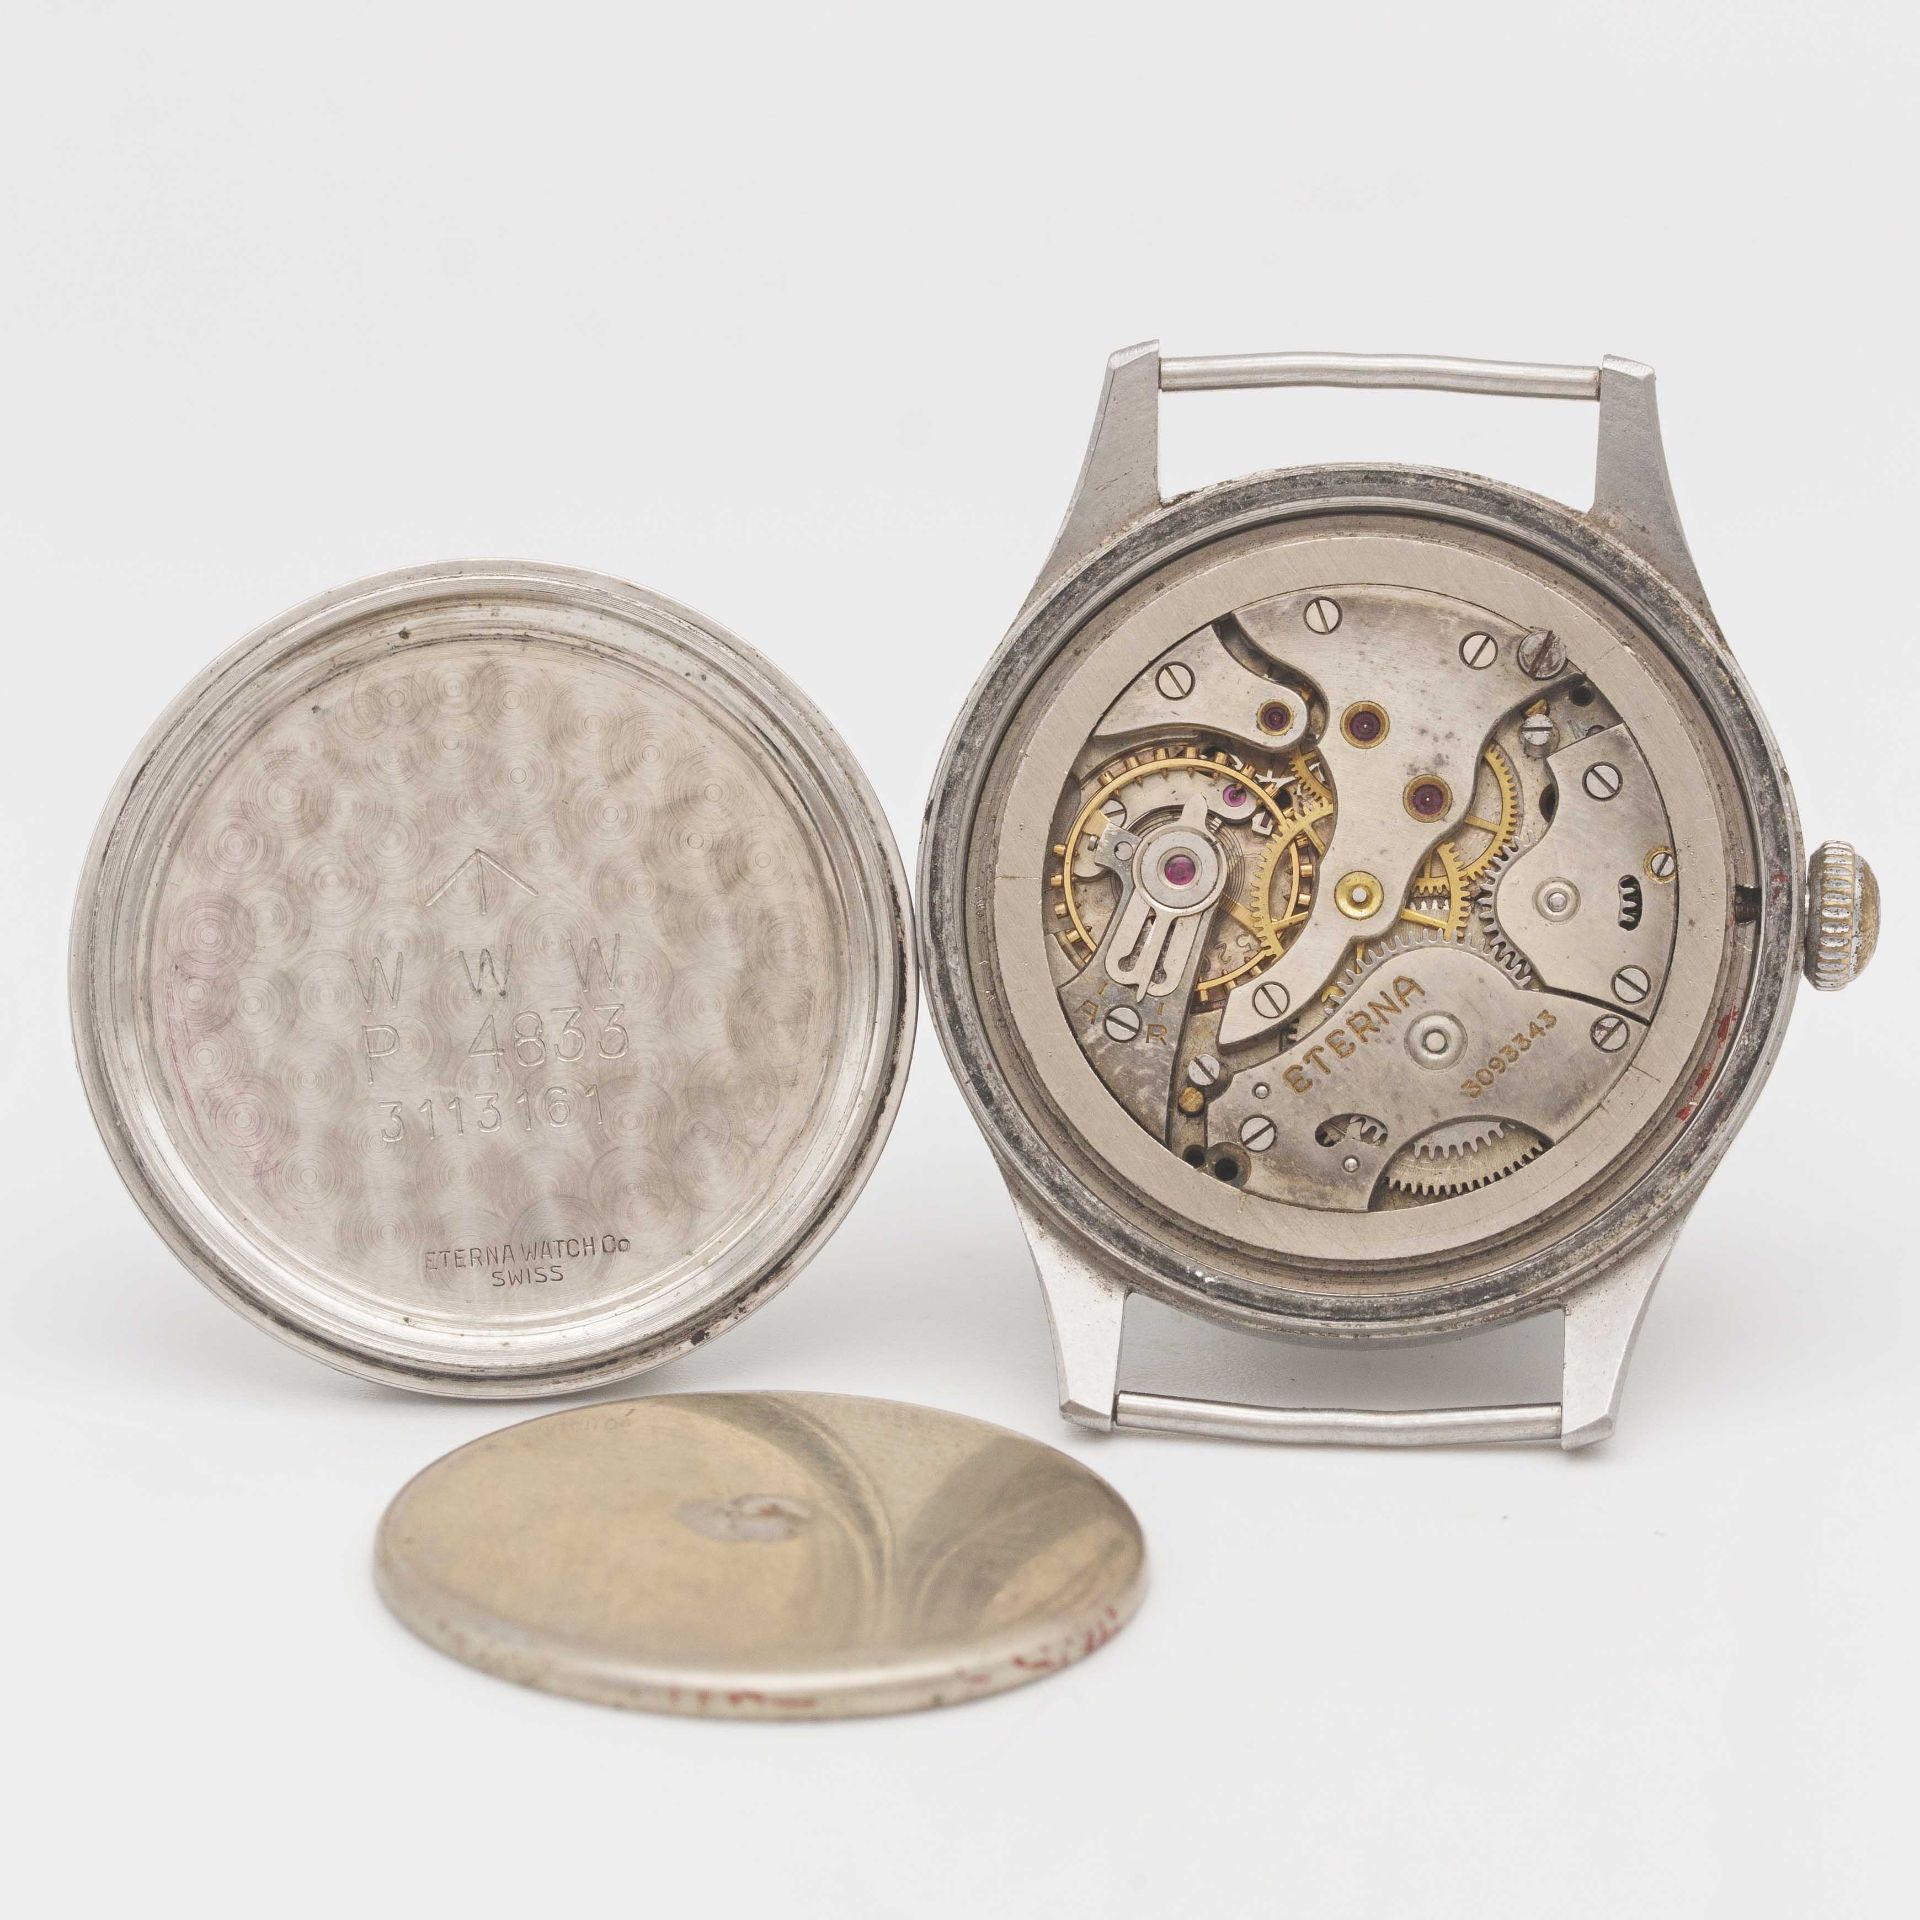 A GENTLEMAN'S STAINLESS STEEL BRITISH MILITARY ETERNA W.W.W. WRIST WATCH CIRCA 1940s, PART OF THE " - Image 8 of 10